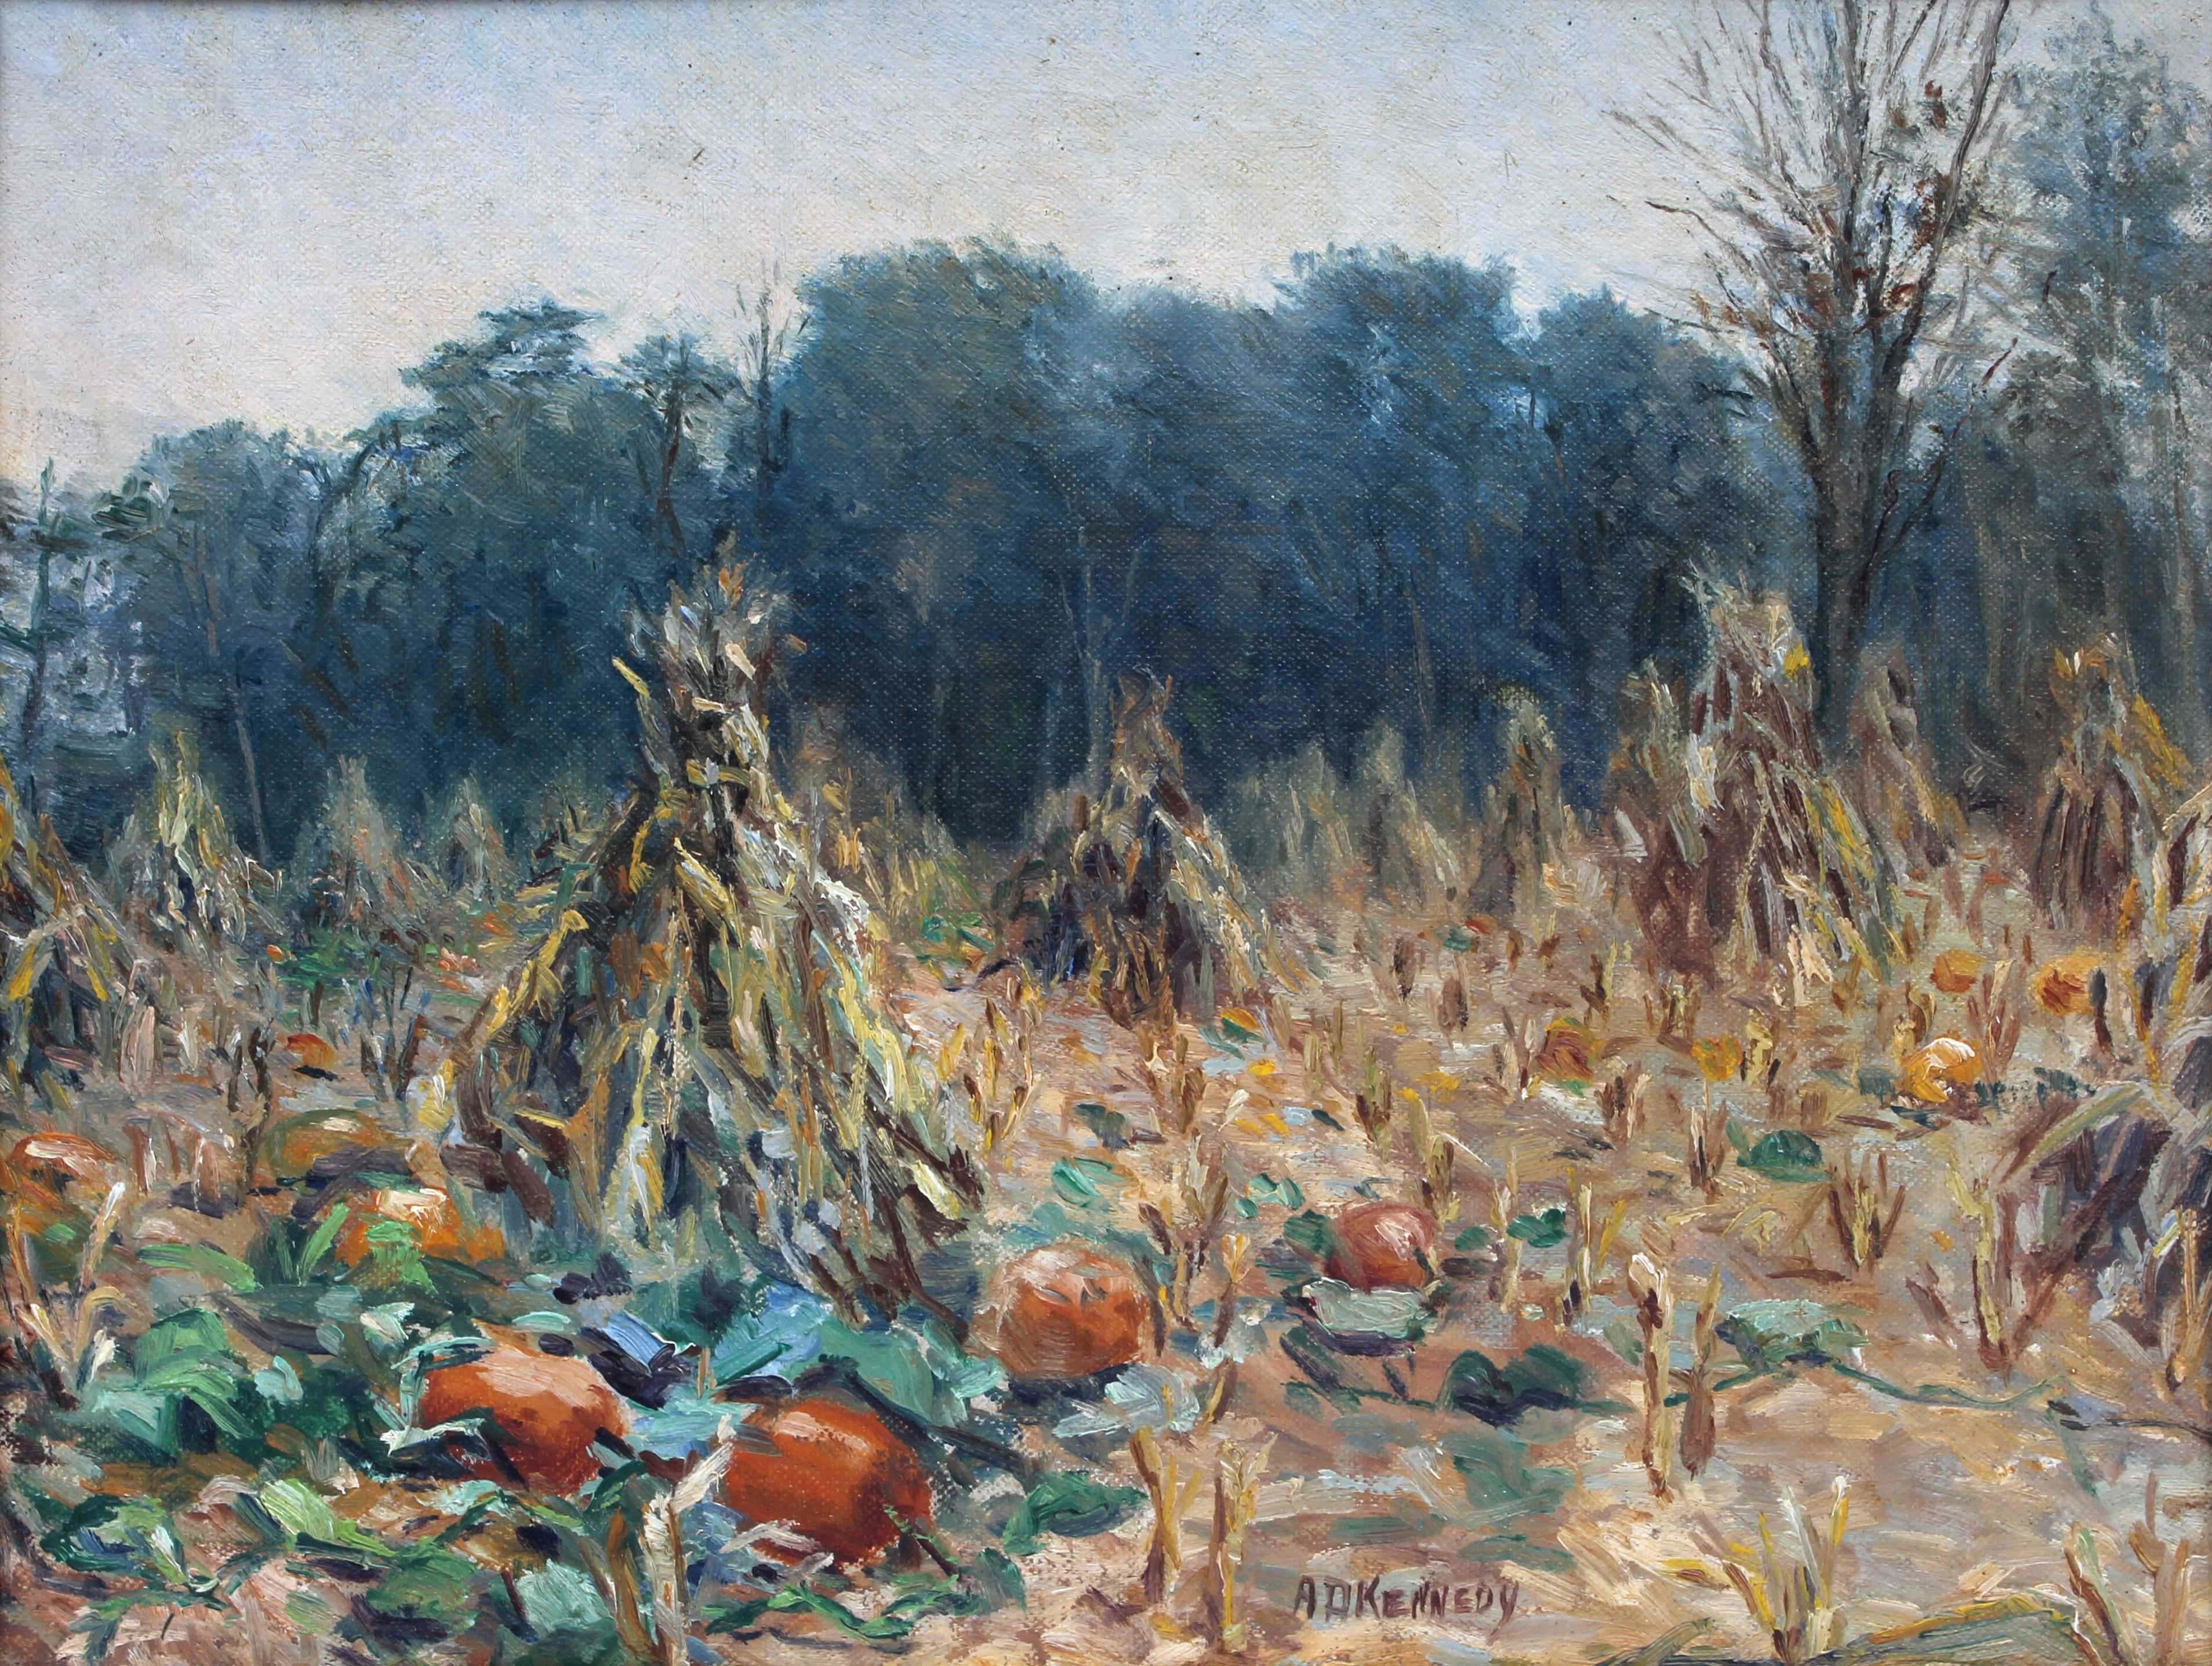 Antique Autumn Fall Landscape Pumpkin Harvest by Kennedy - Painting by Andrew D. Kennedy